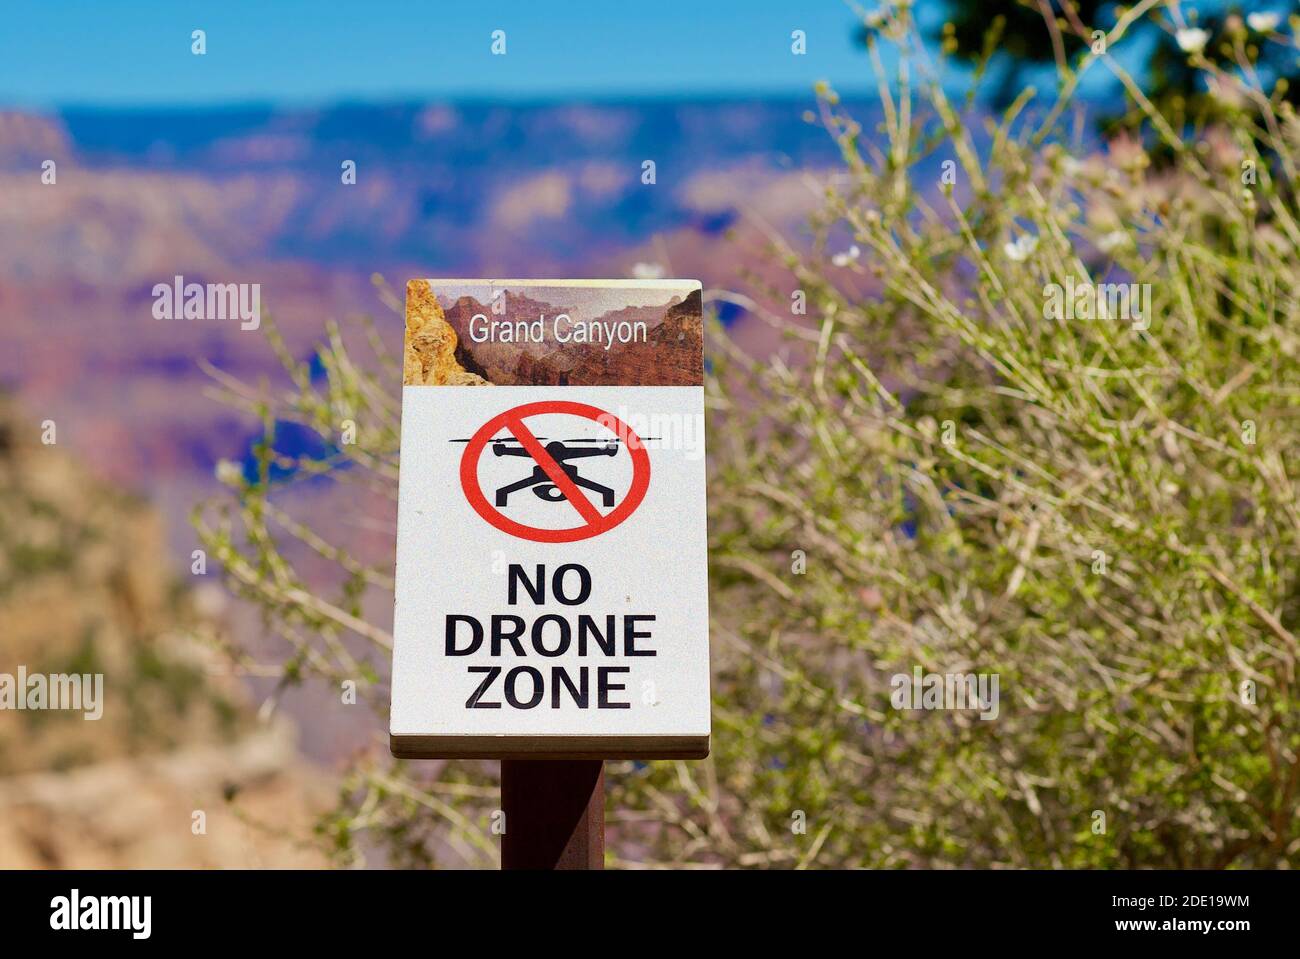 Grand Canyon National Park, Arizona, USA - July 29, 2020: A 'No Drone Zone' sign reminds visitors it is illegal to fly drones over the Grand Canyon. Stock Photo